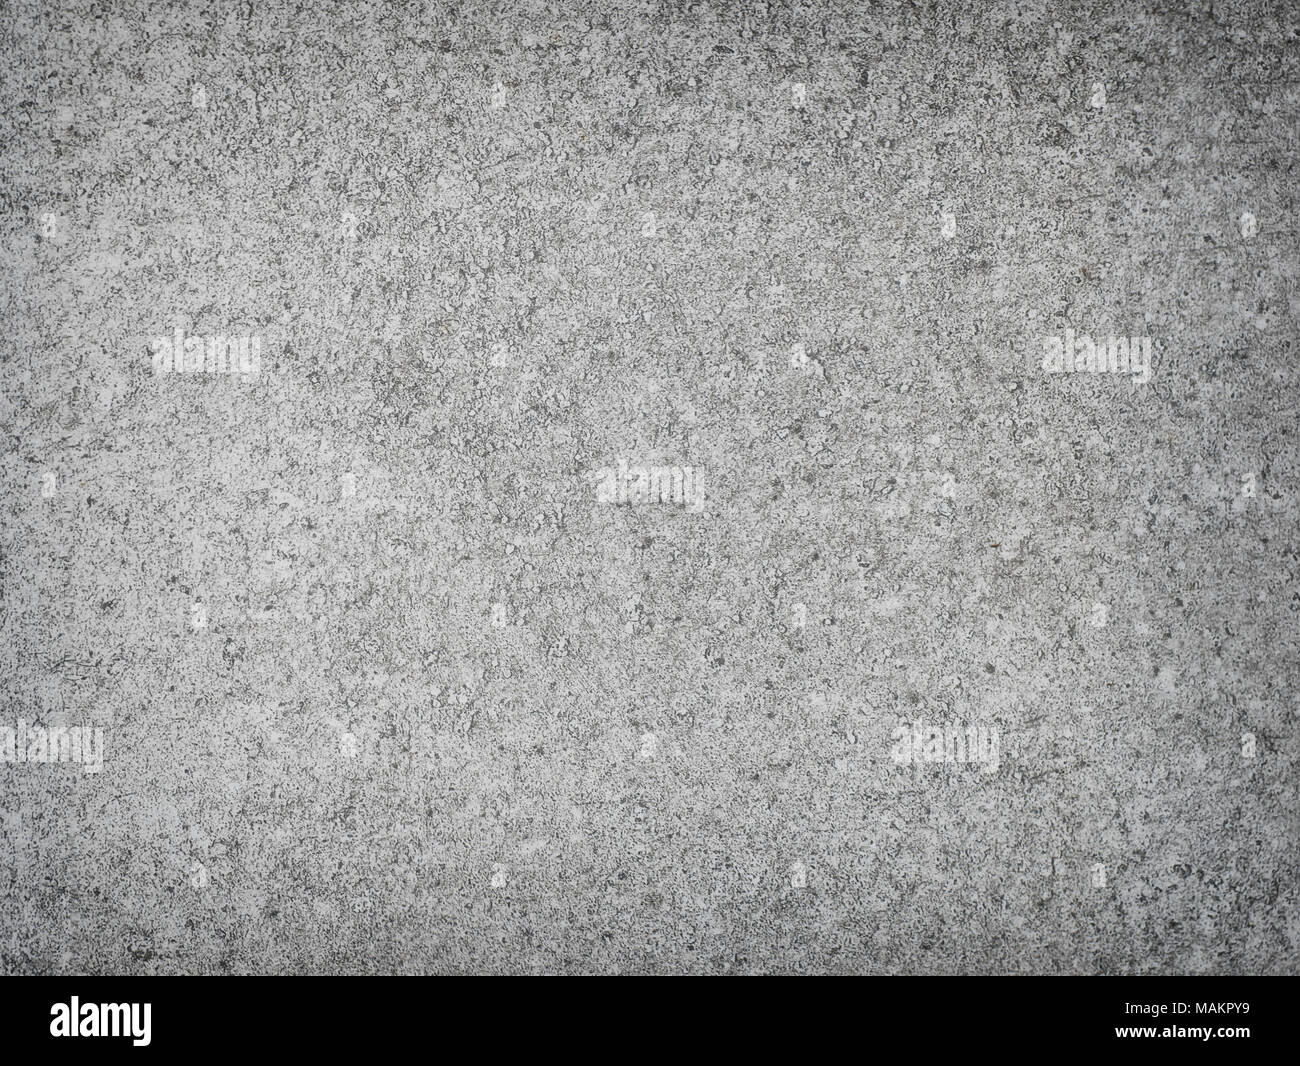 Concrete Wall Texture Background,flooring for text, images, websites, websites or graphics for commercial campaigns. Stock Photo